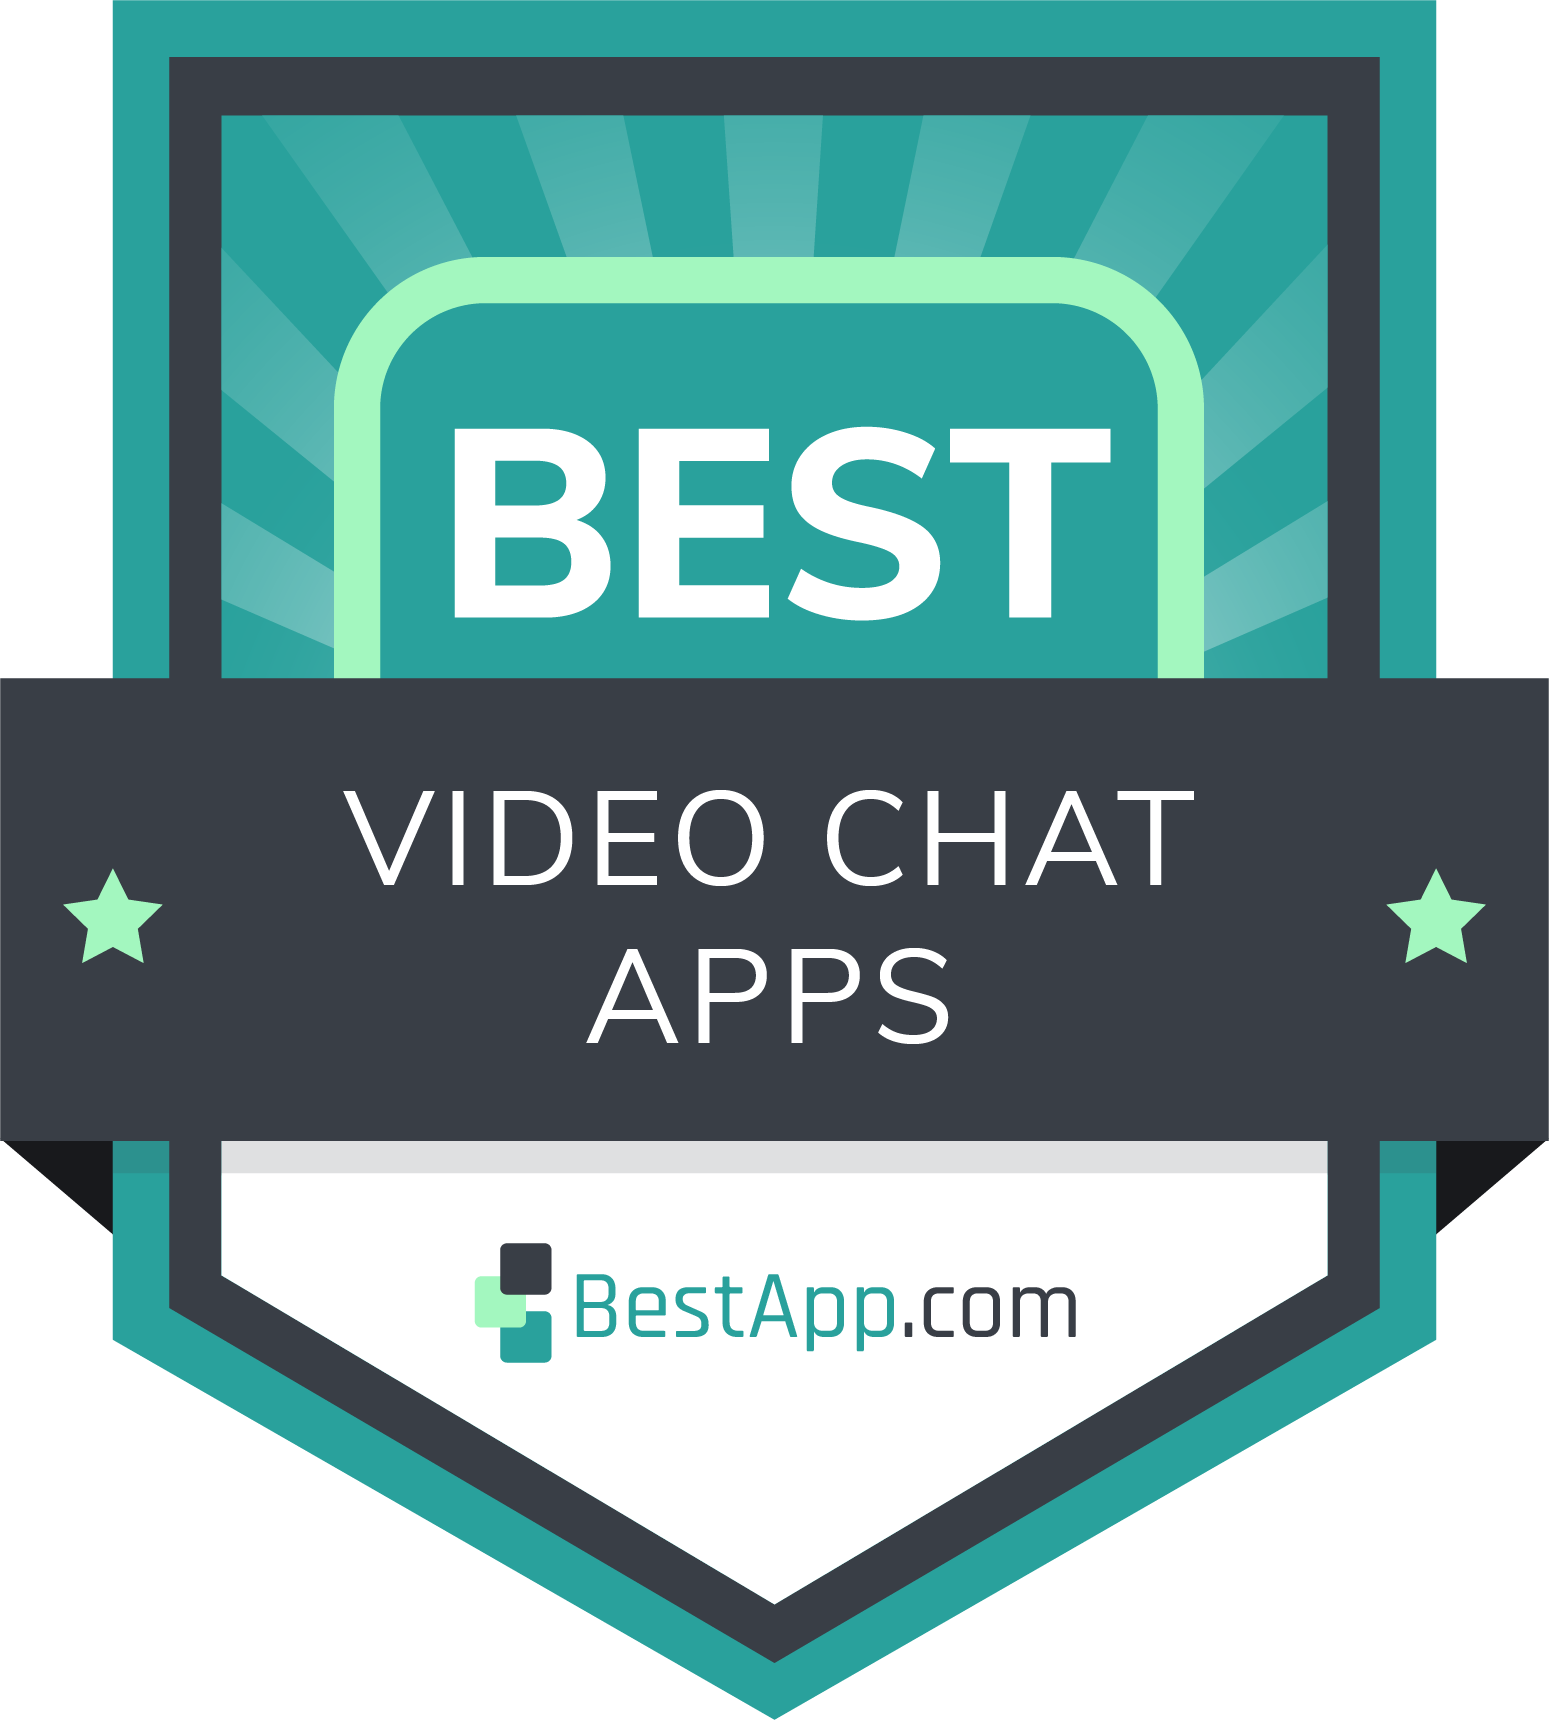 Best Video Chat Apps Badge